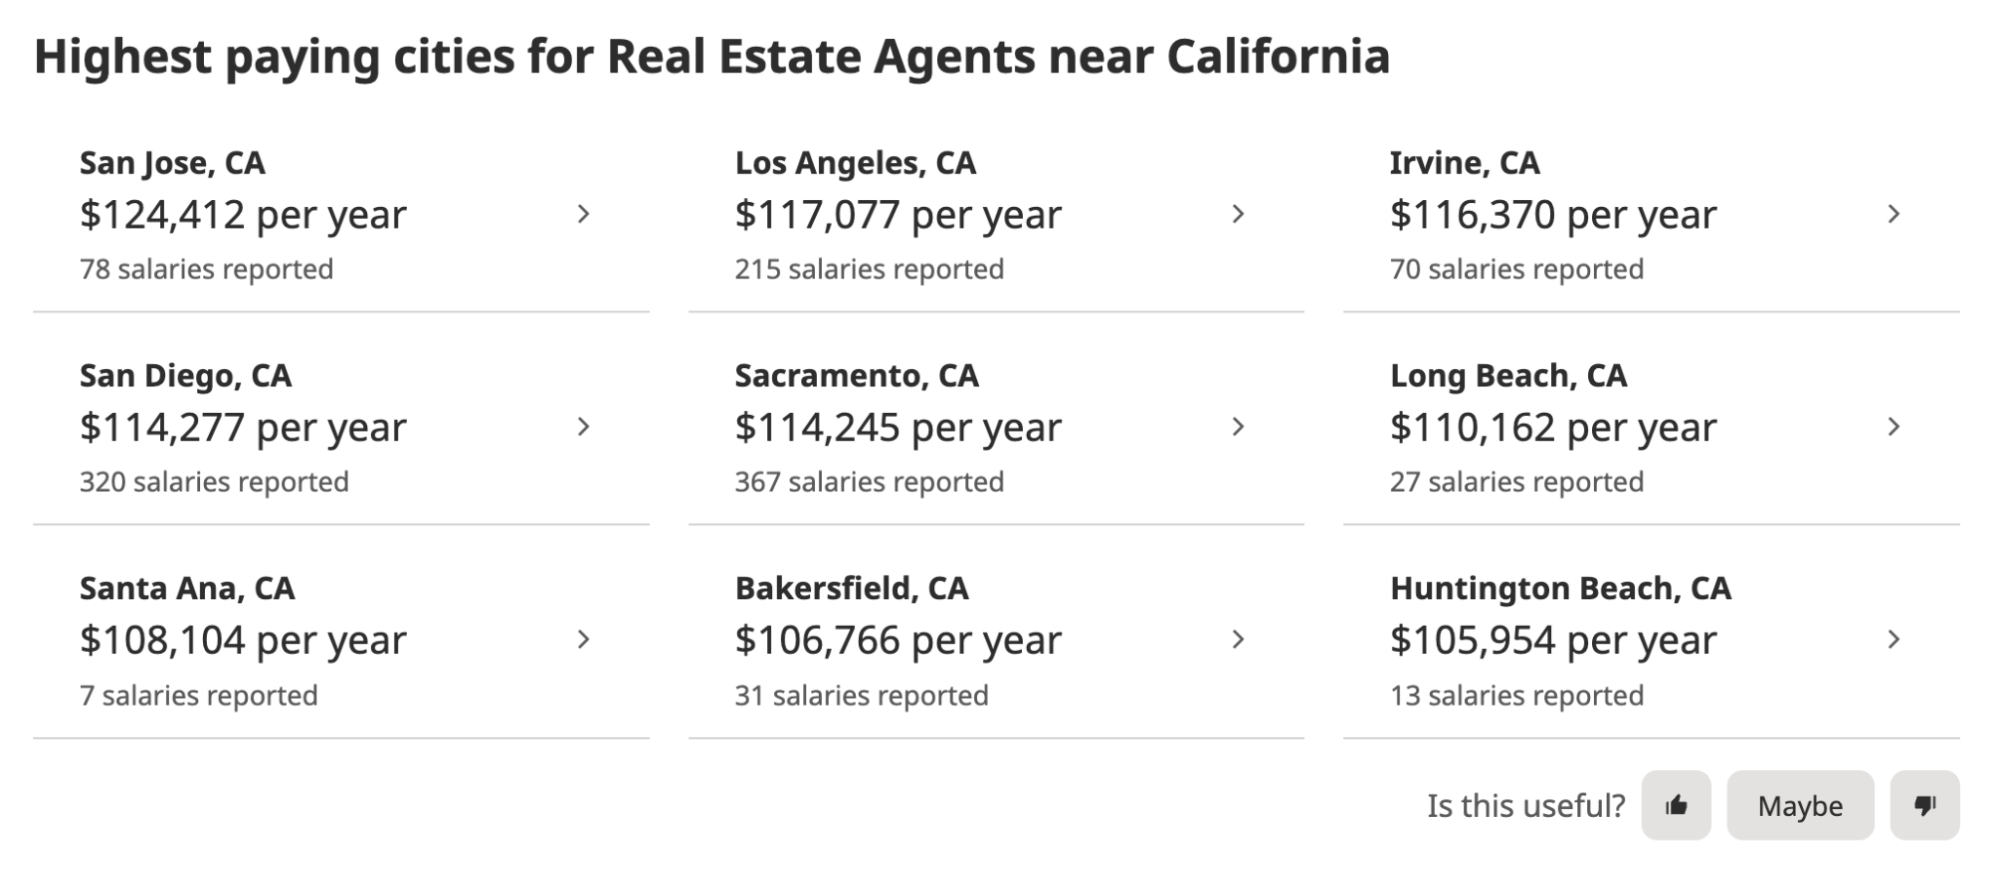 Information for highest paying cities for real estate agent in California.